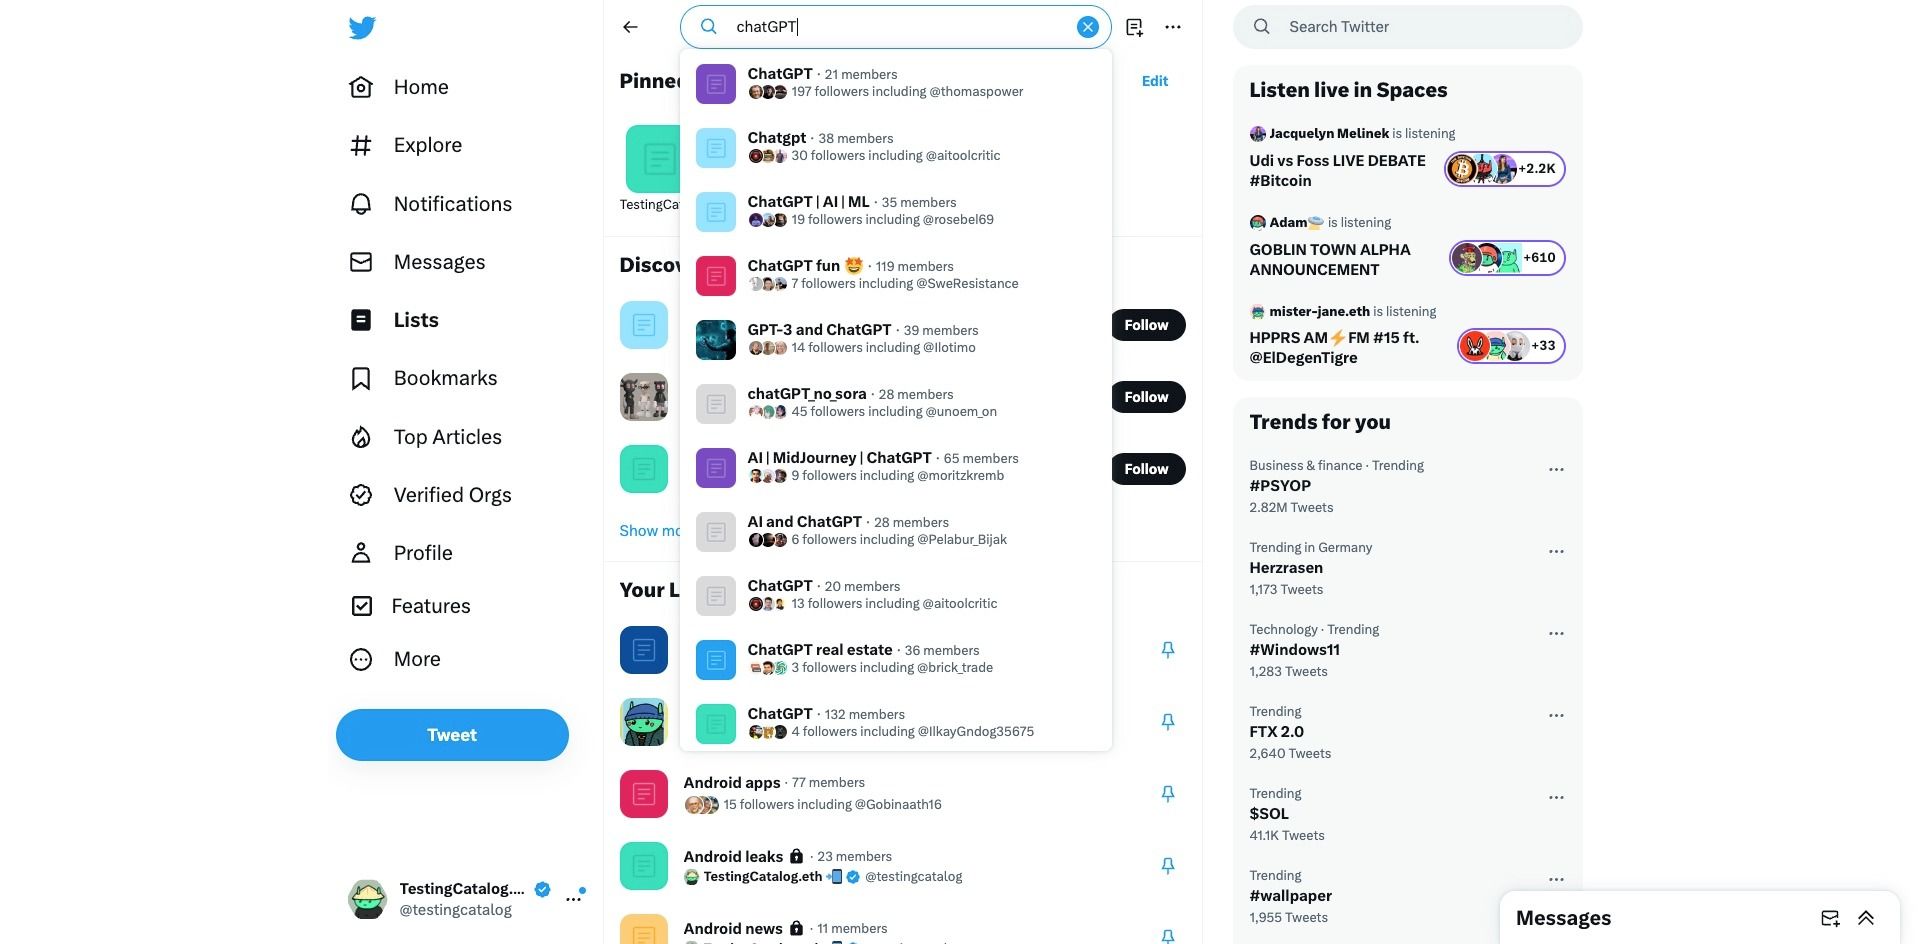 Twitter for Web now allows searching across lists and shows user subscriptions on the profile page